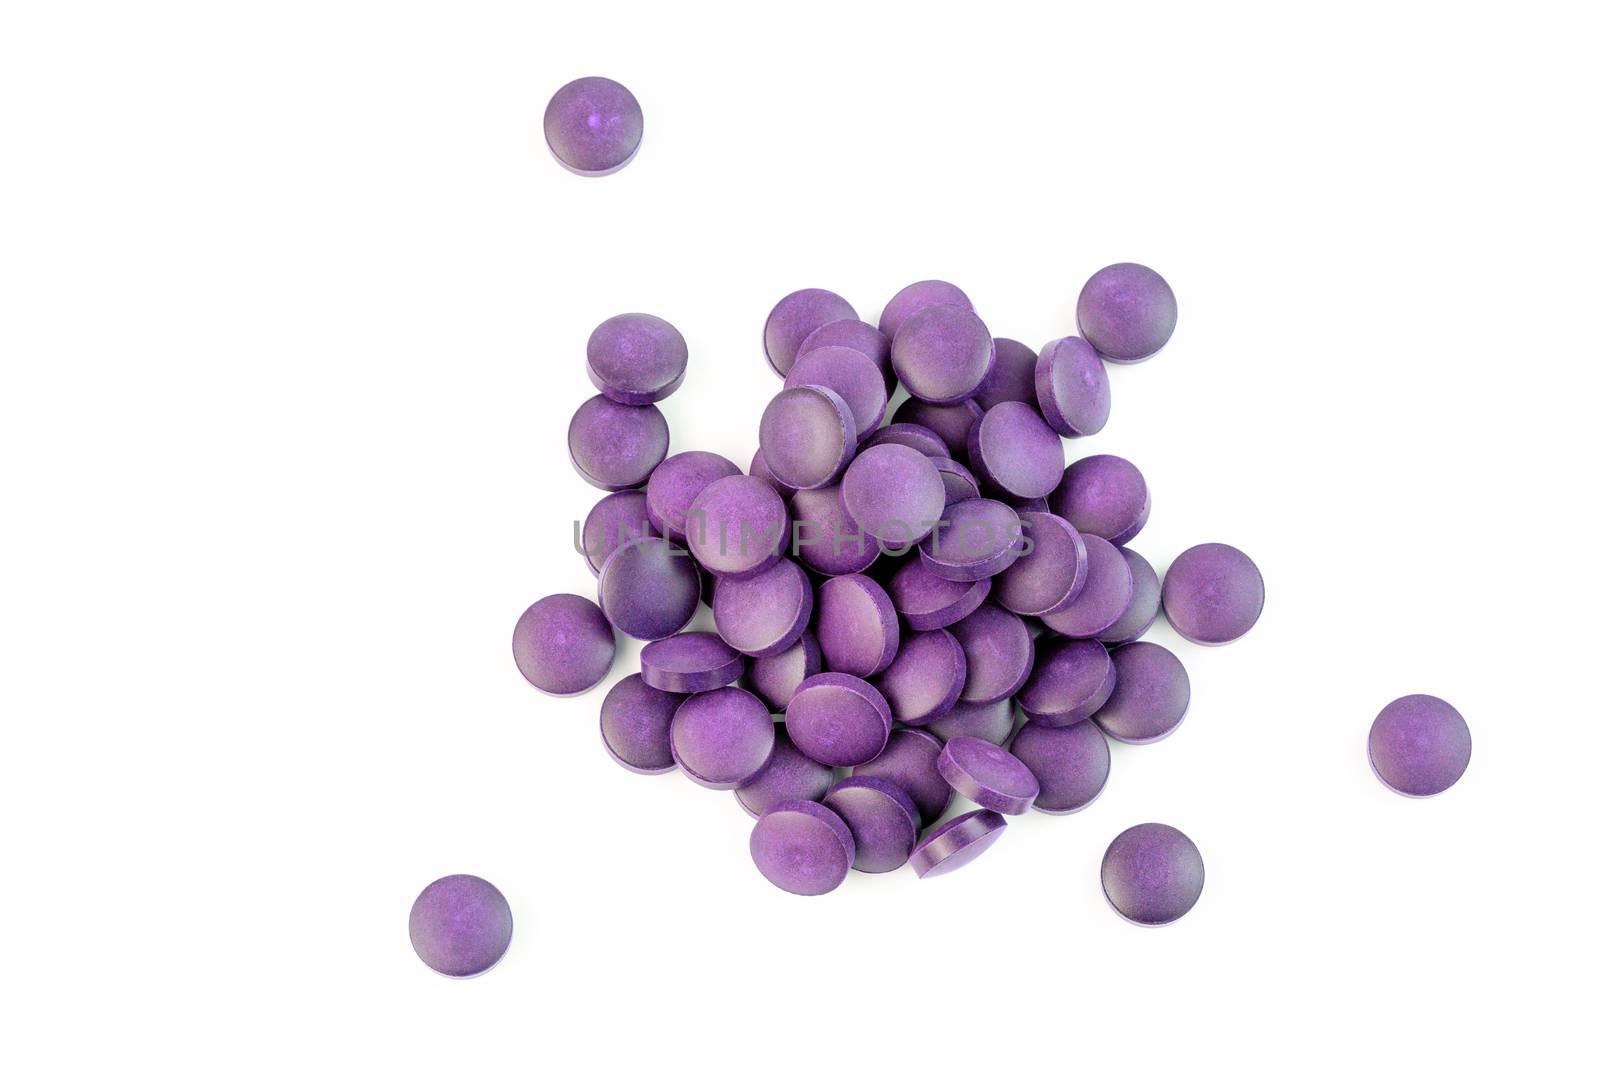 a small pile of purple compacted powder pills isolated on white background in linear perspective by z1b